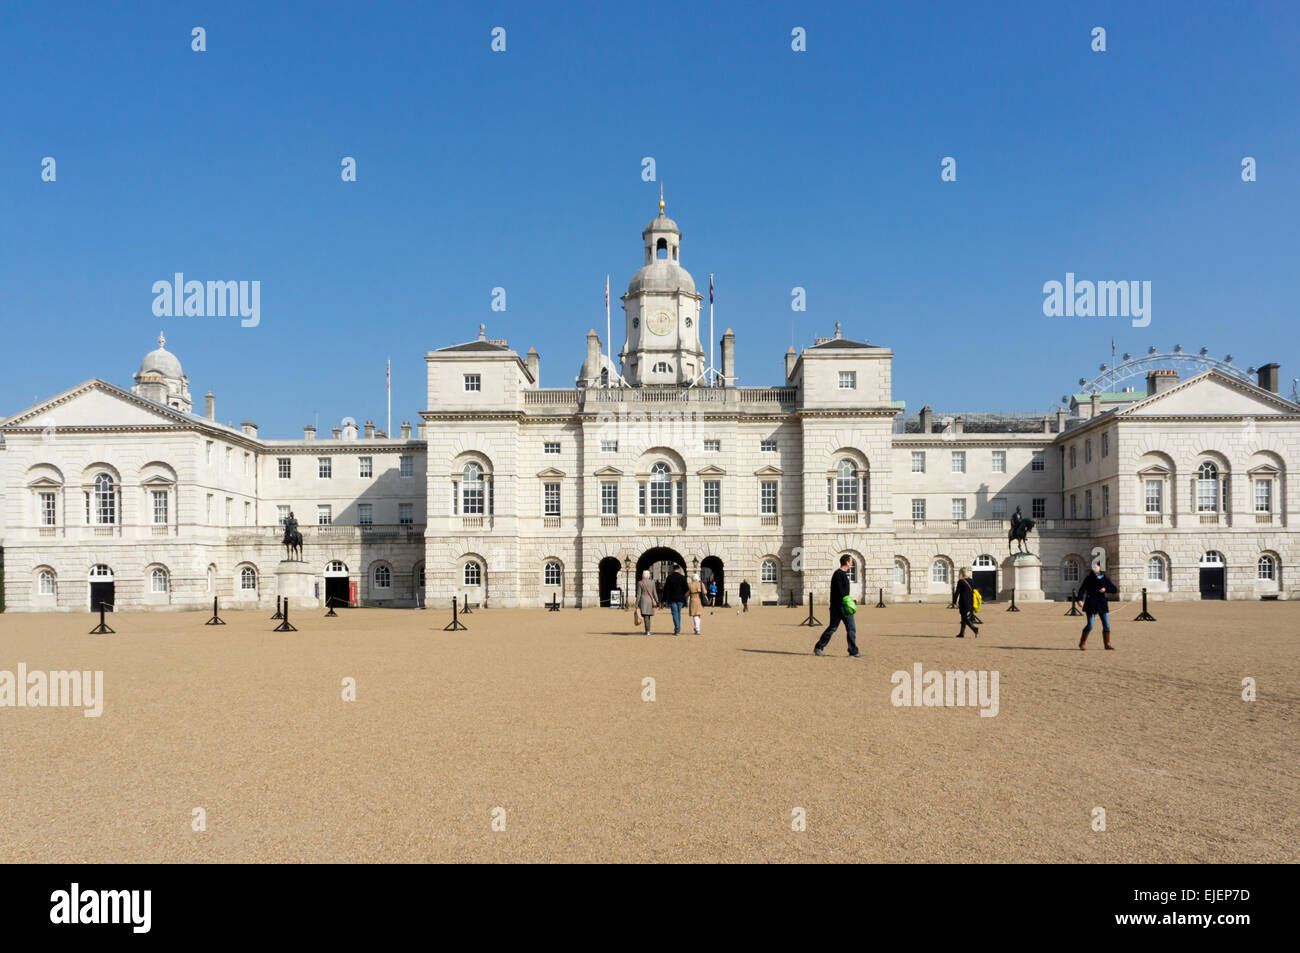 Visitors walking across Horseguards Parade parade ground in Whitehall, central London. Stock Photo